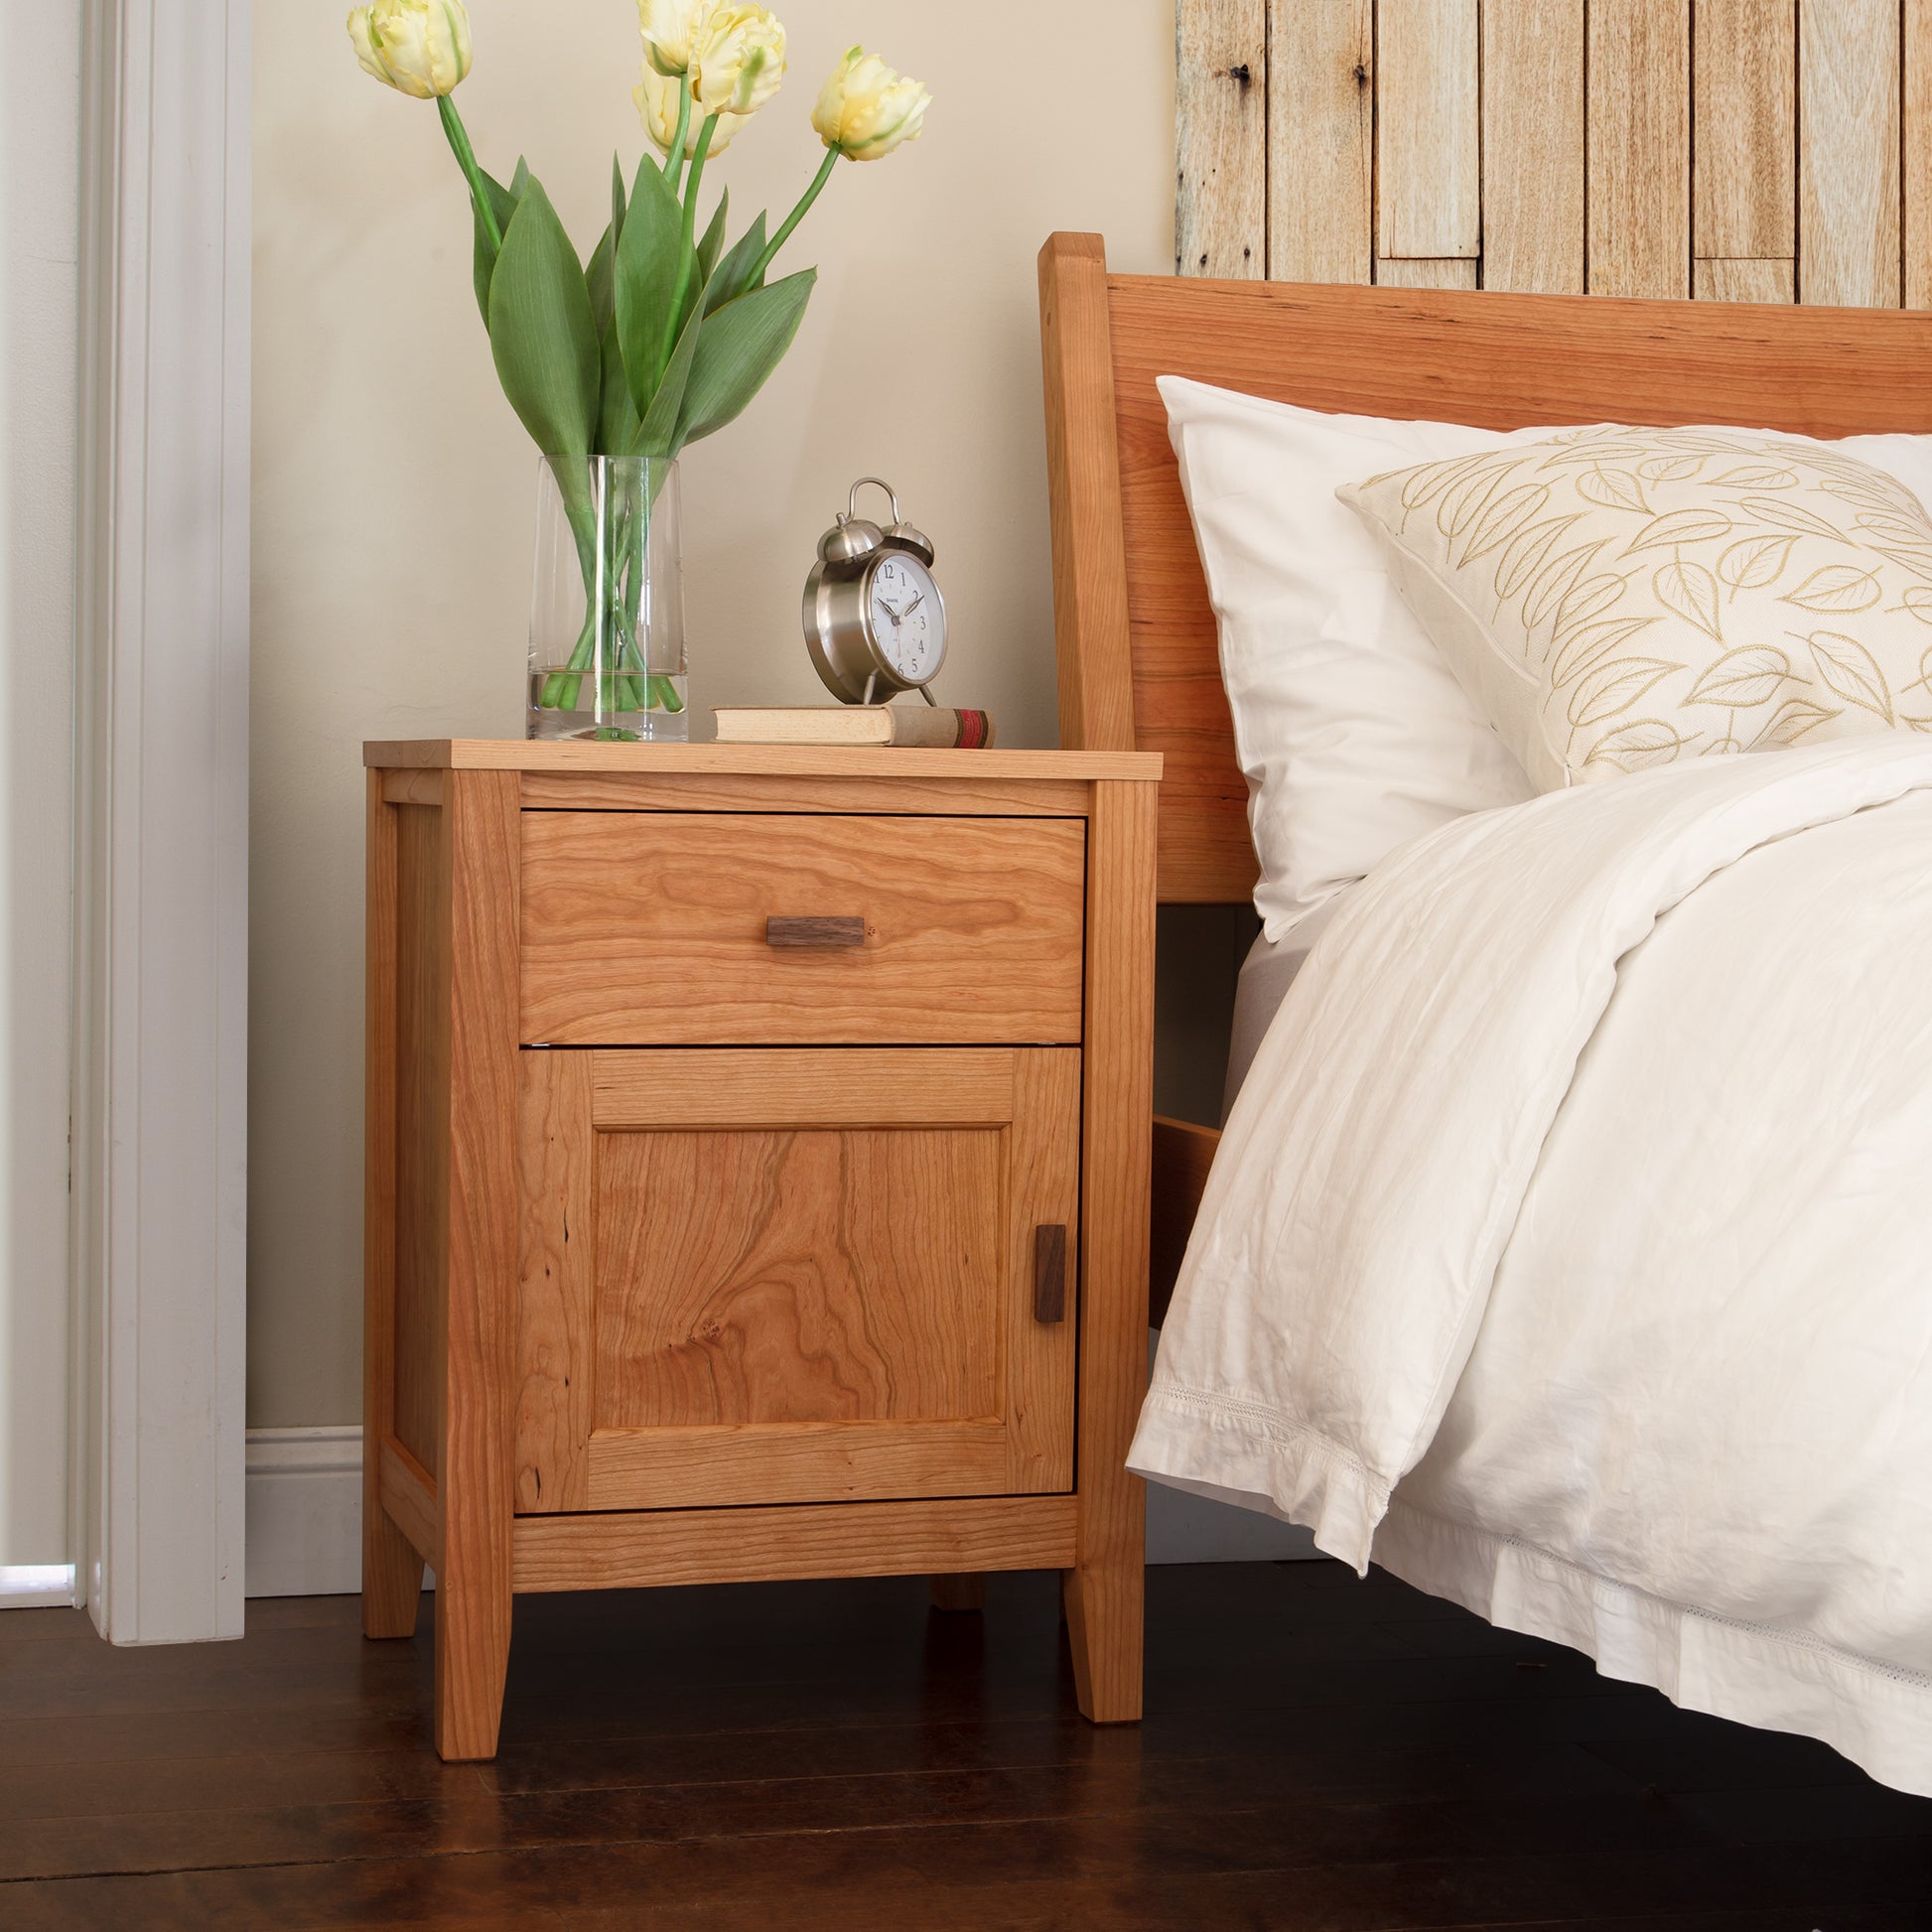 A Maple Corner Woodworks Andover Modern 1-Drawer Nightstand with Door, made of hardwood, placed next to a bed.